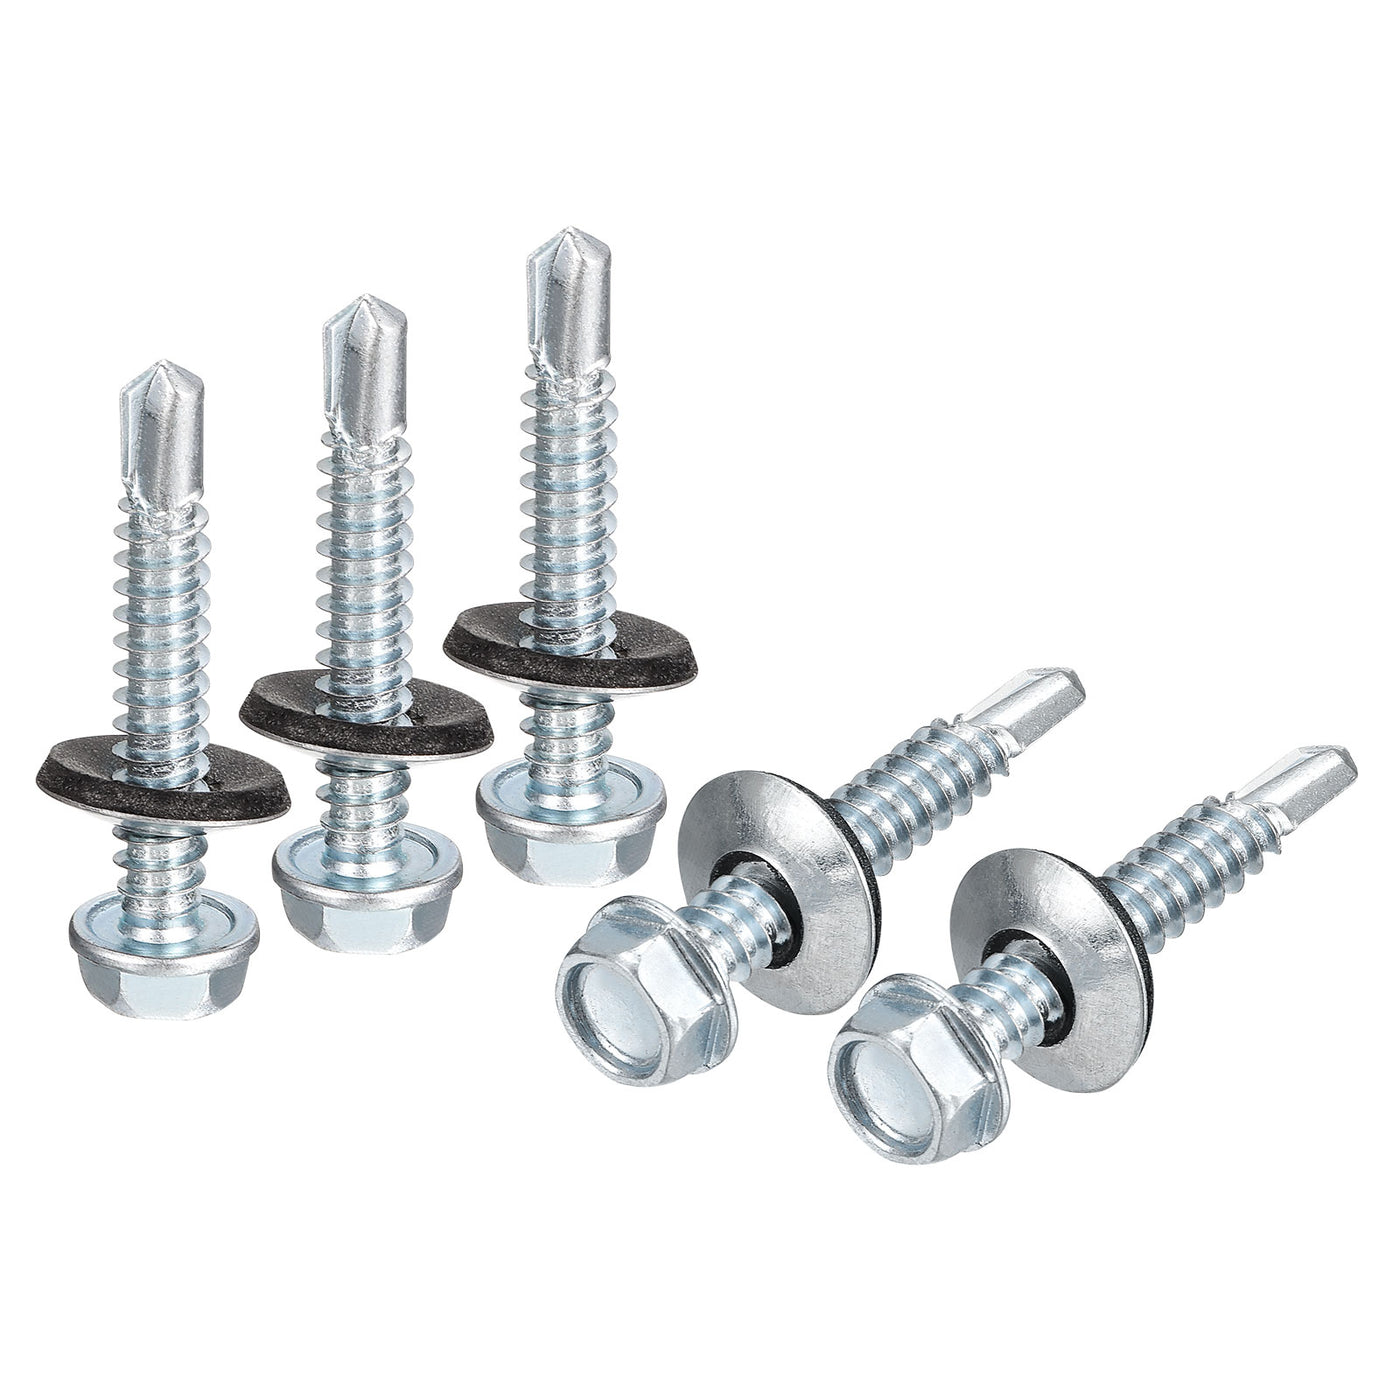 uxcell Uxcell #14 x 1-1/2" Self Drilling Screws, 25pcs Roofing Screws with EPDM Washer